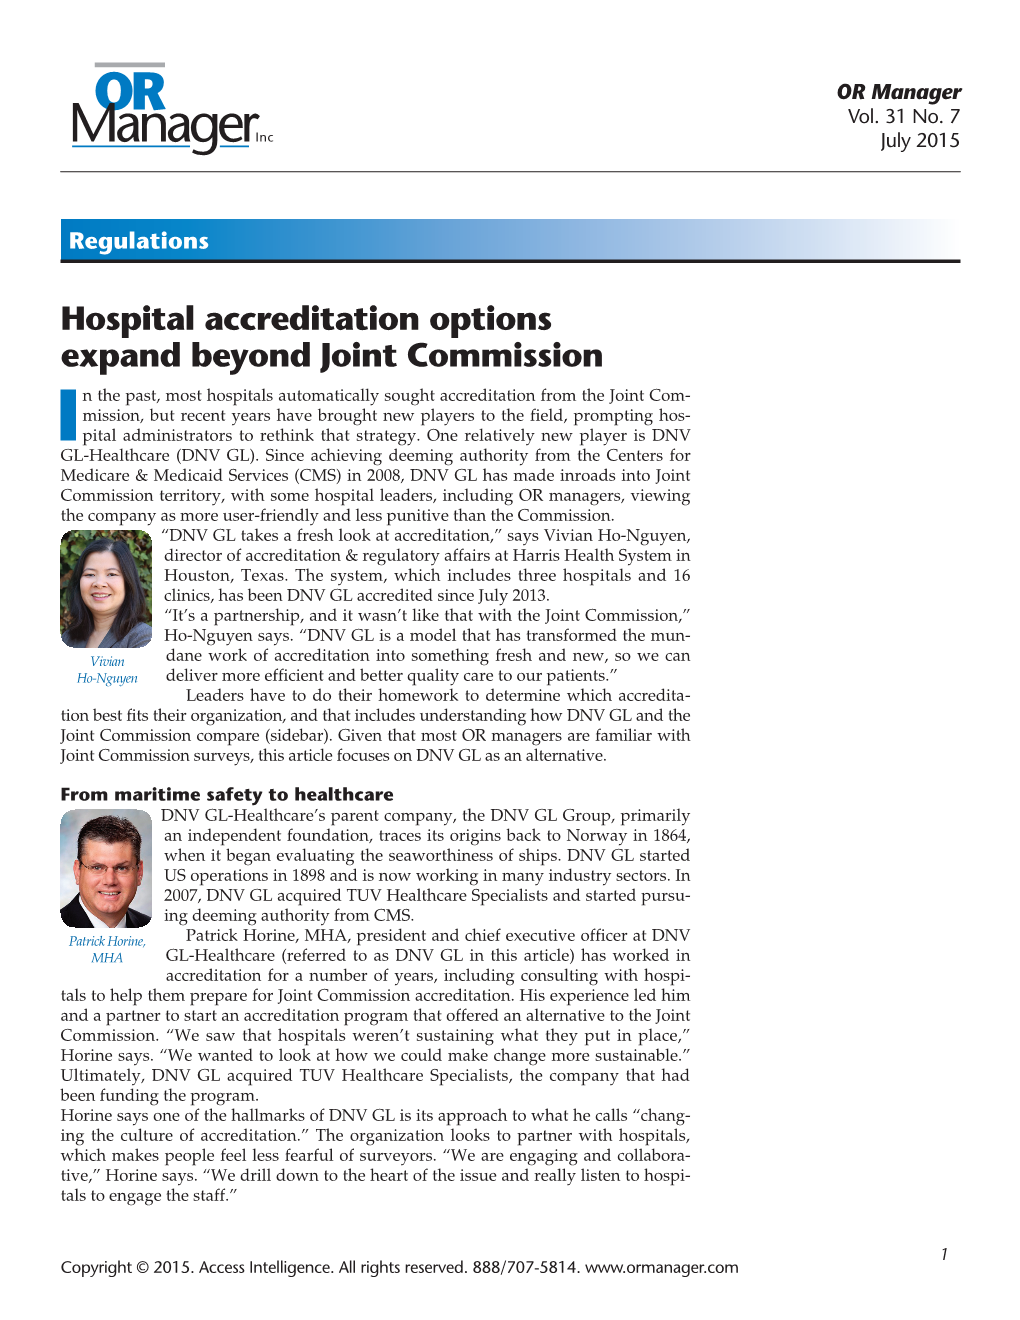 Hospital Accreditation Options Expand Beyond Joint Commission